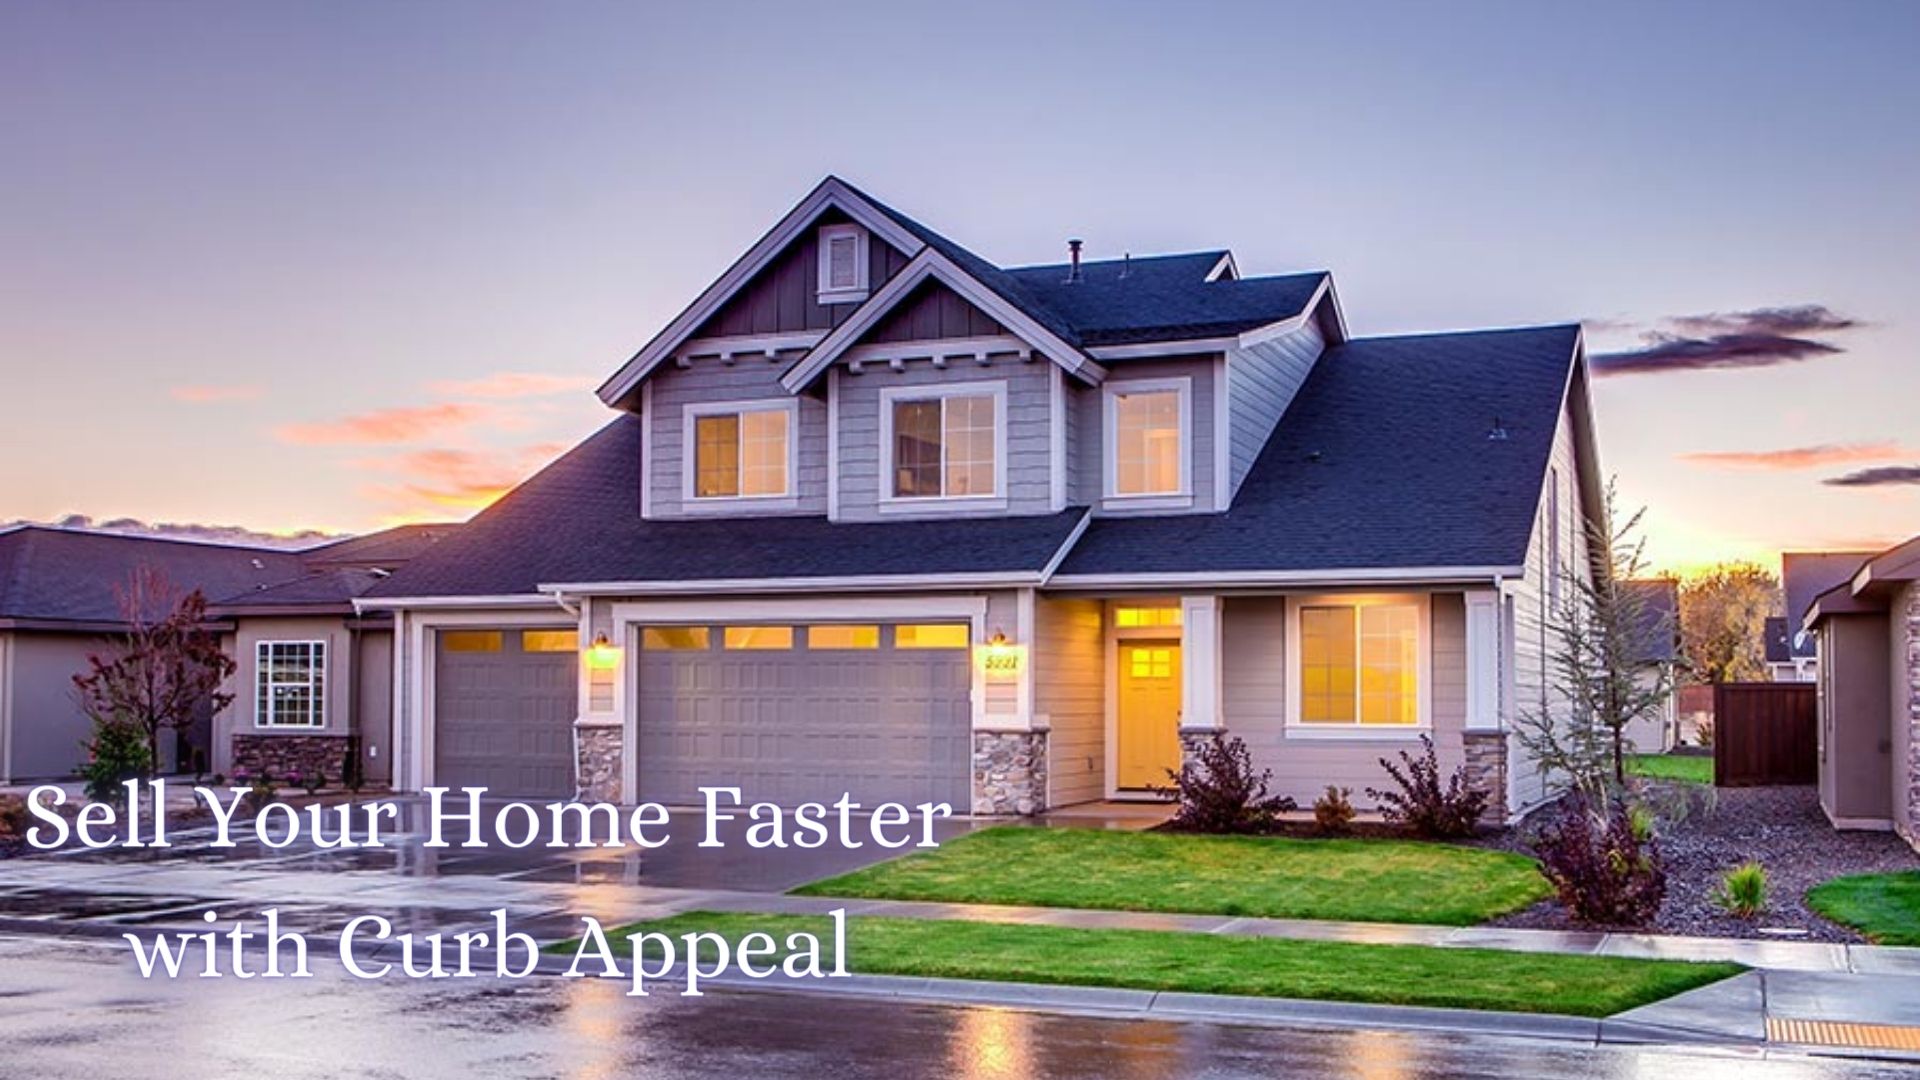 Sell Your Home Faster with Curb Appeal.